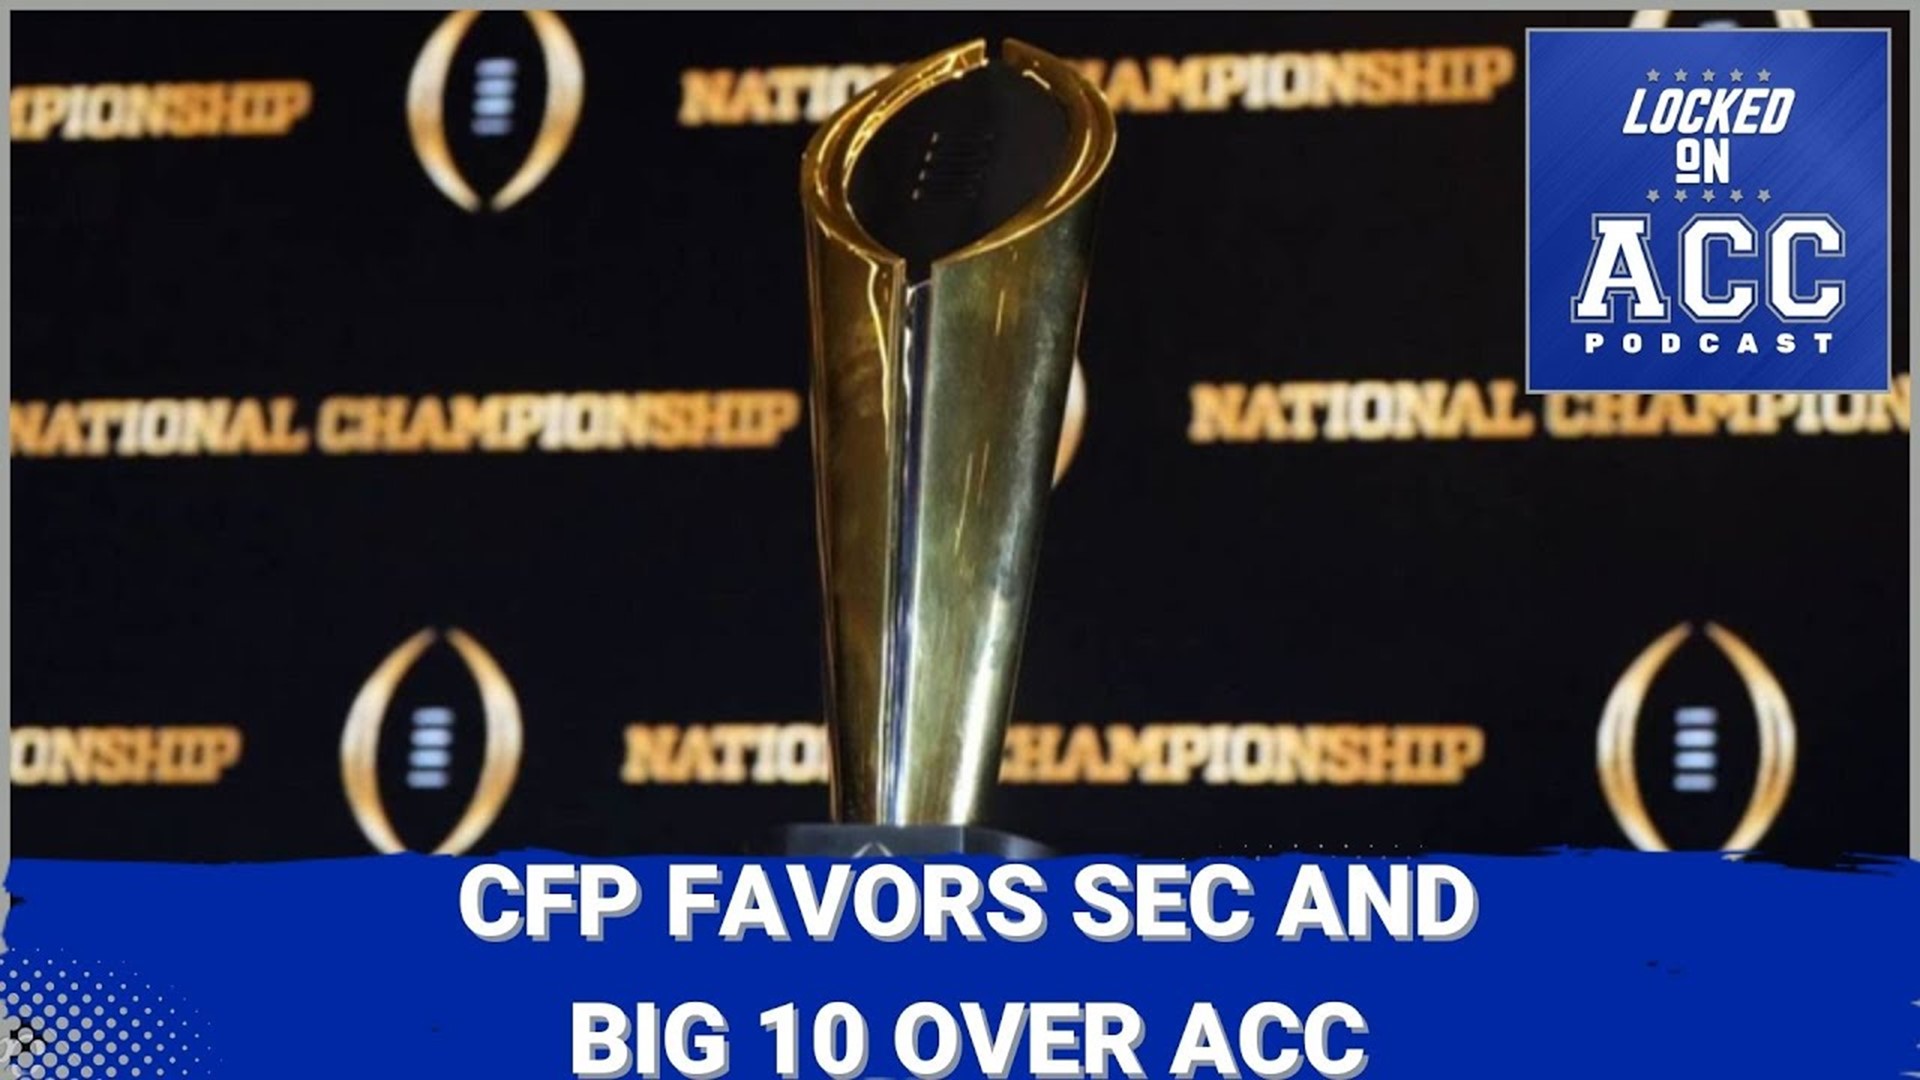 In this episode, Candace and Kenton discuss the new CFP terms where the SEC and Big Ten literally double the ACC and Big 12